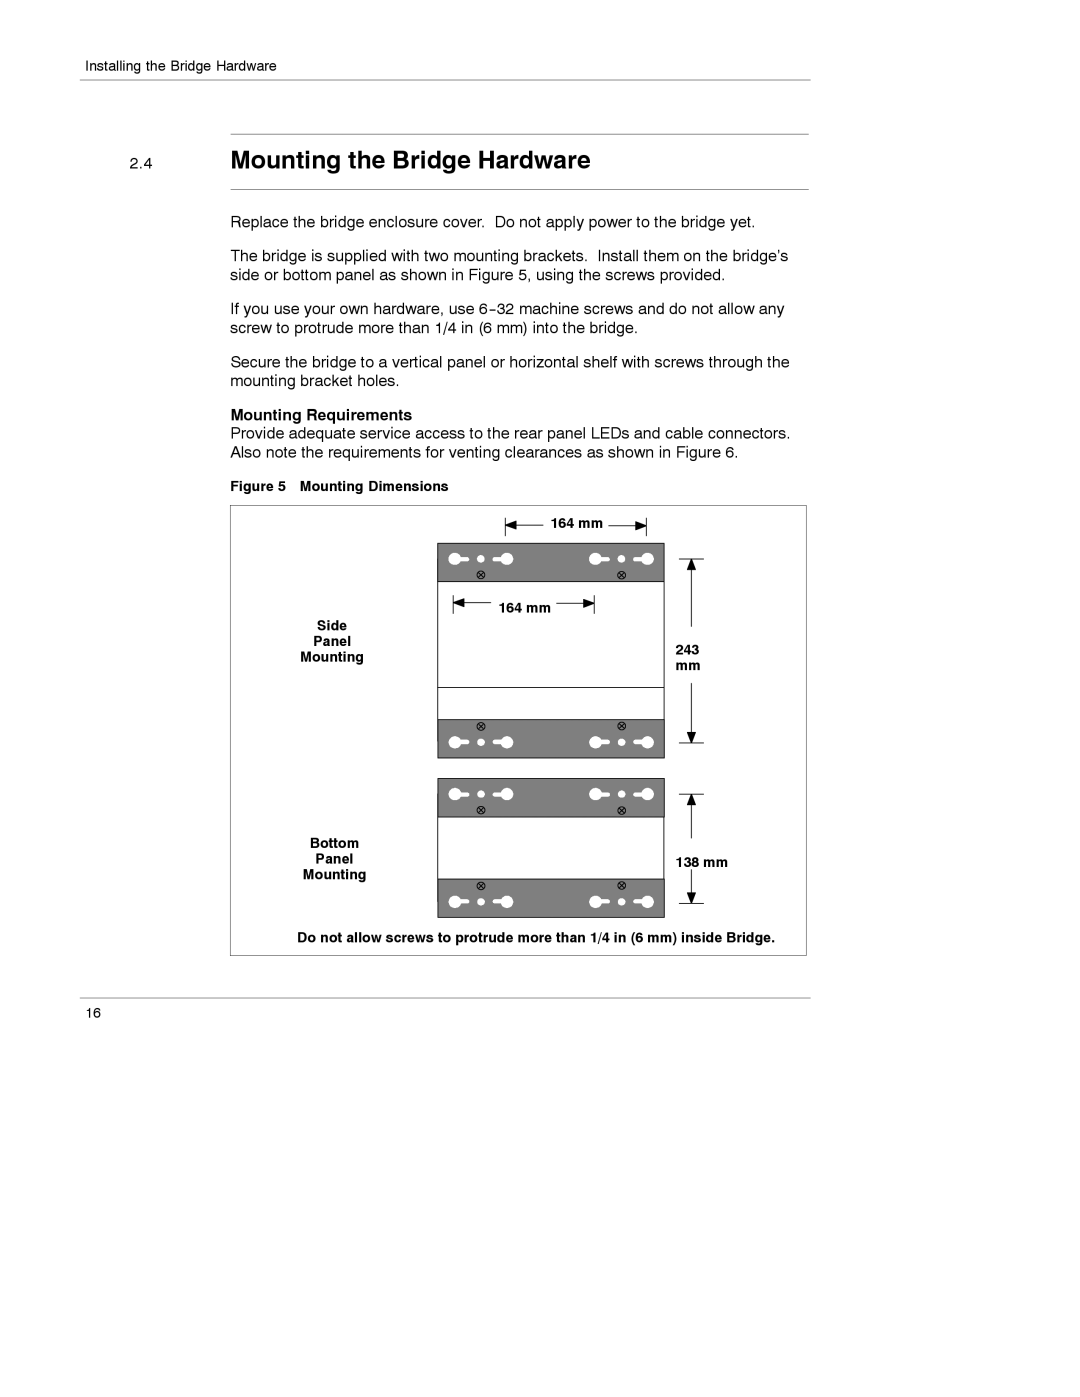 Schneider Electric 174 CEV manual Mounting the Bridge Hardware, Mounting Requirements 